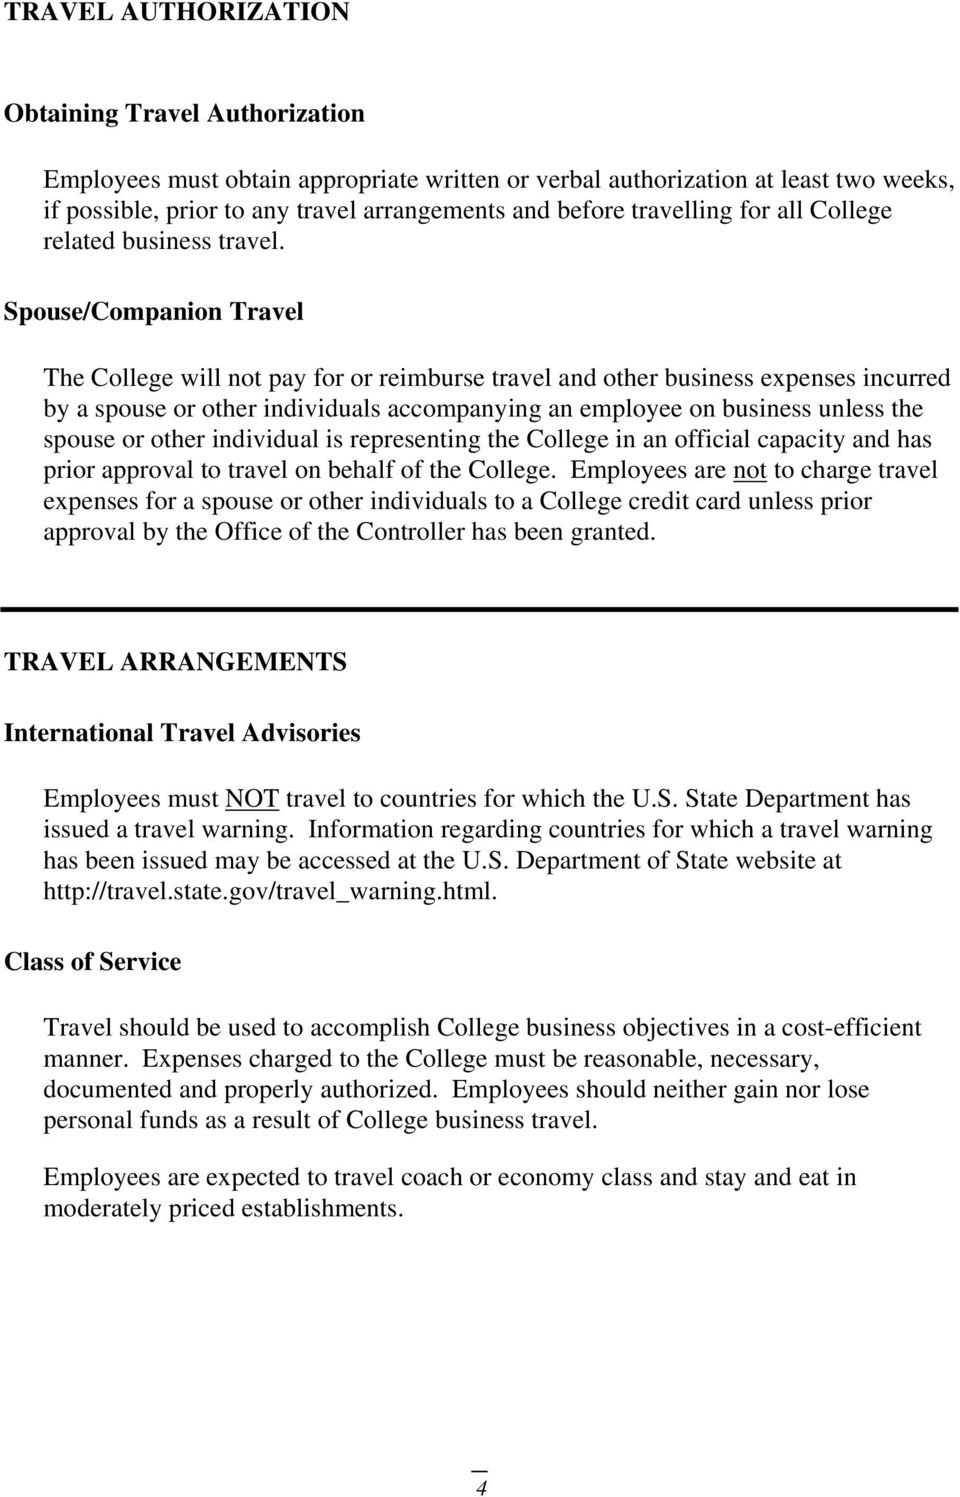 Spouse/Companion Travel The College will not pay for or reimburse travel and other business expenses incurred by a spouse or other individuals accompanying an employee on business unless the spouse